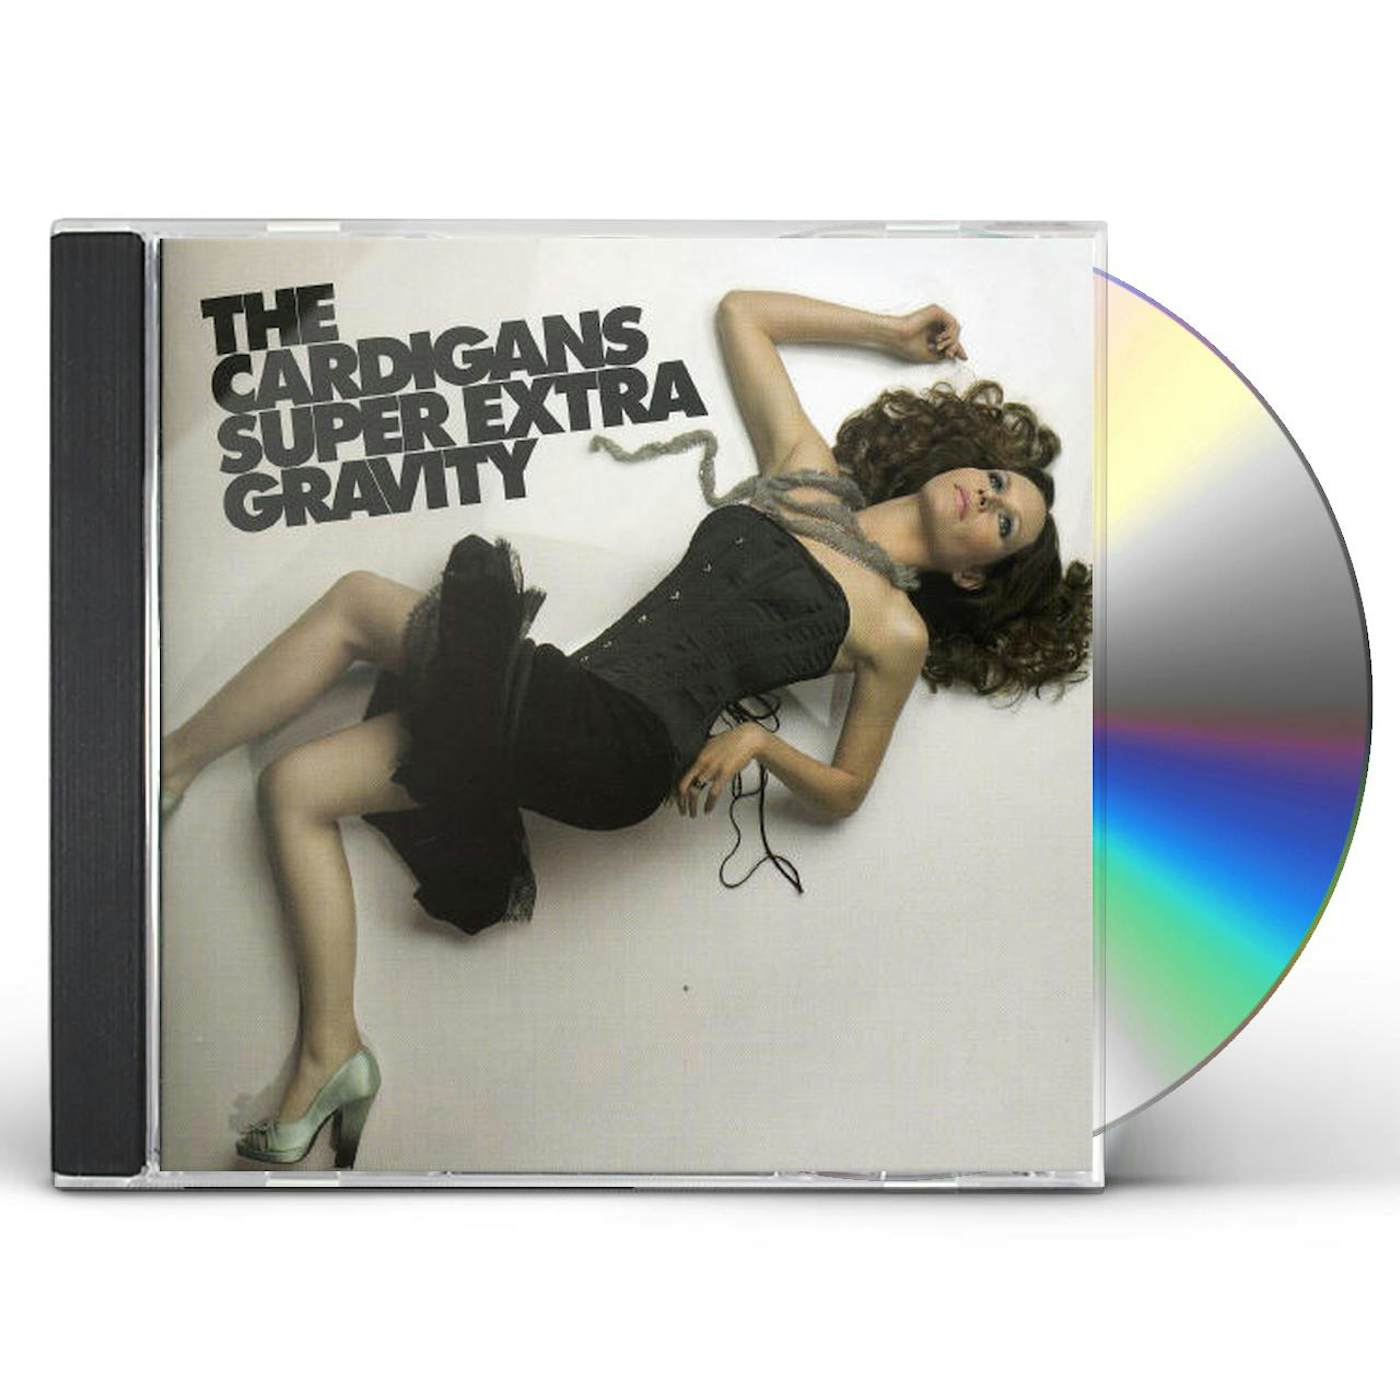 The Cardigans SUPER EXTRA GRAVITY CD